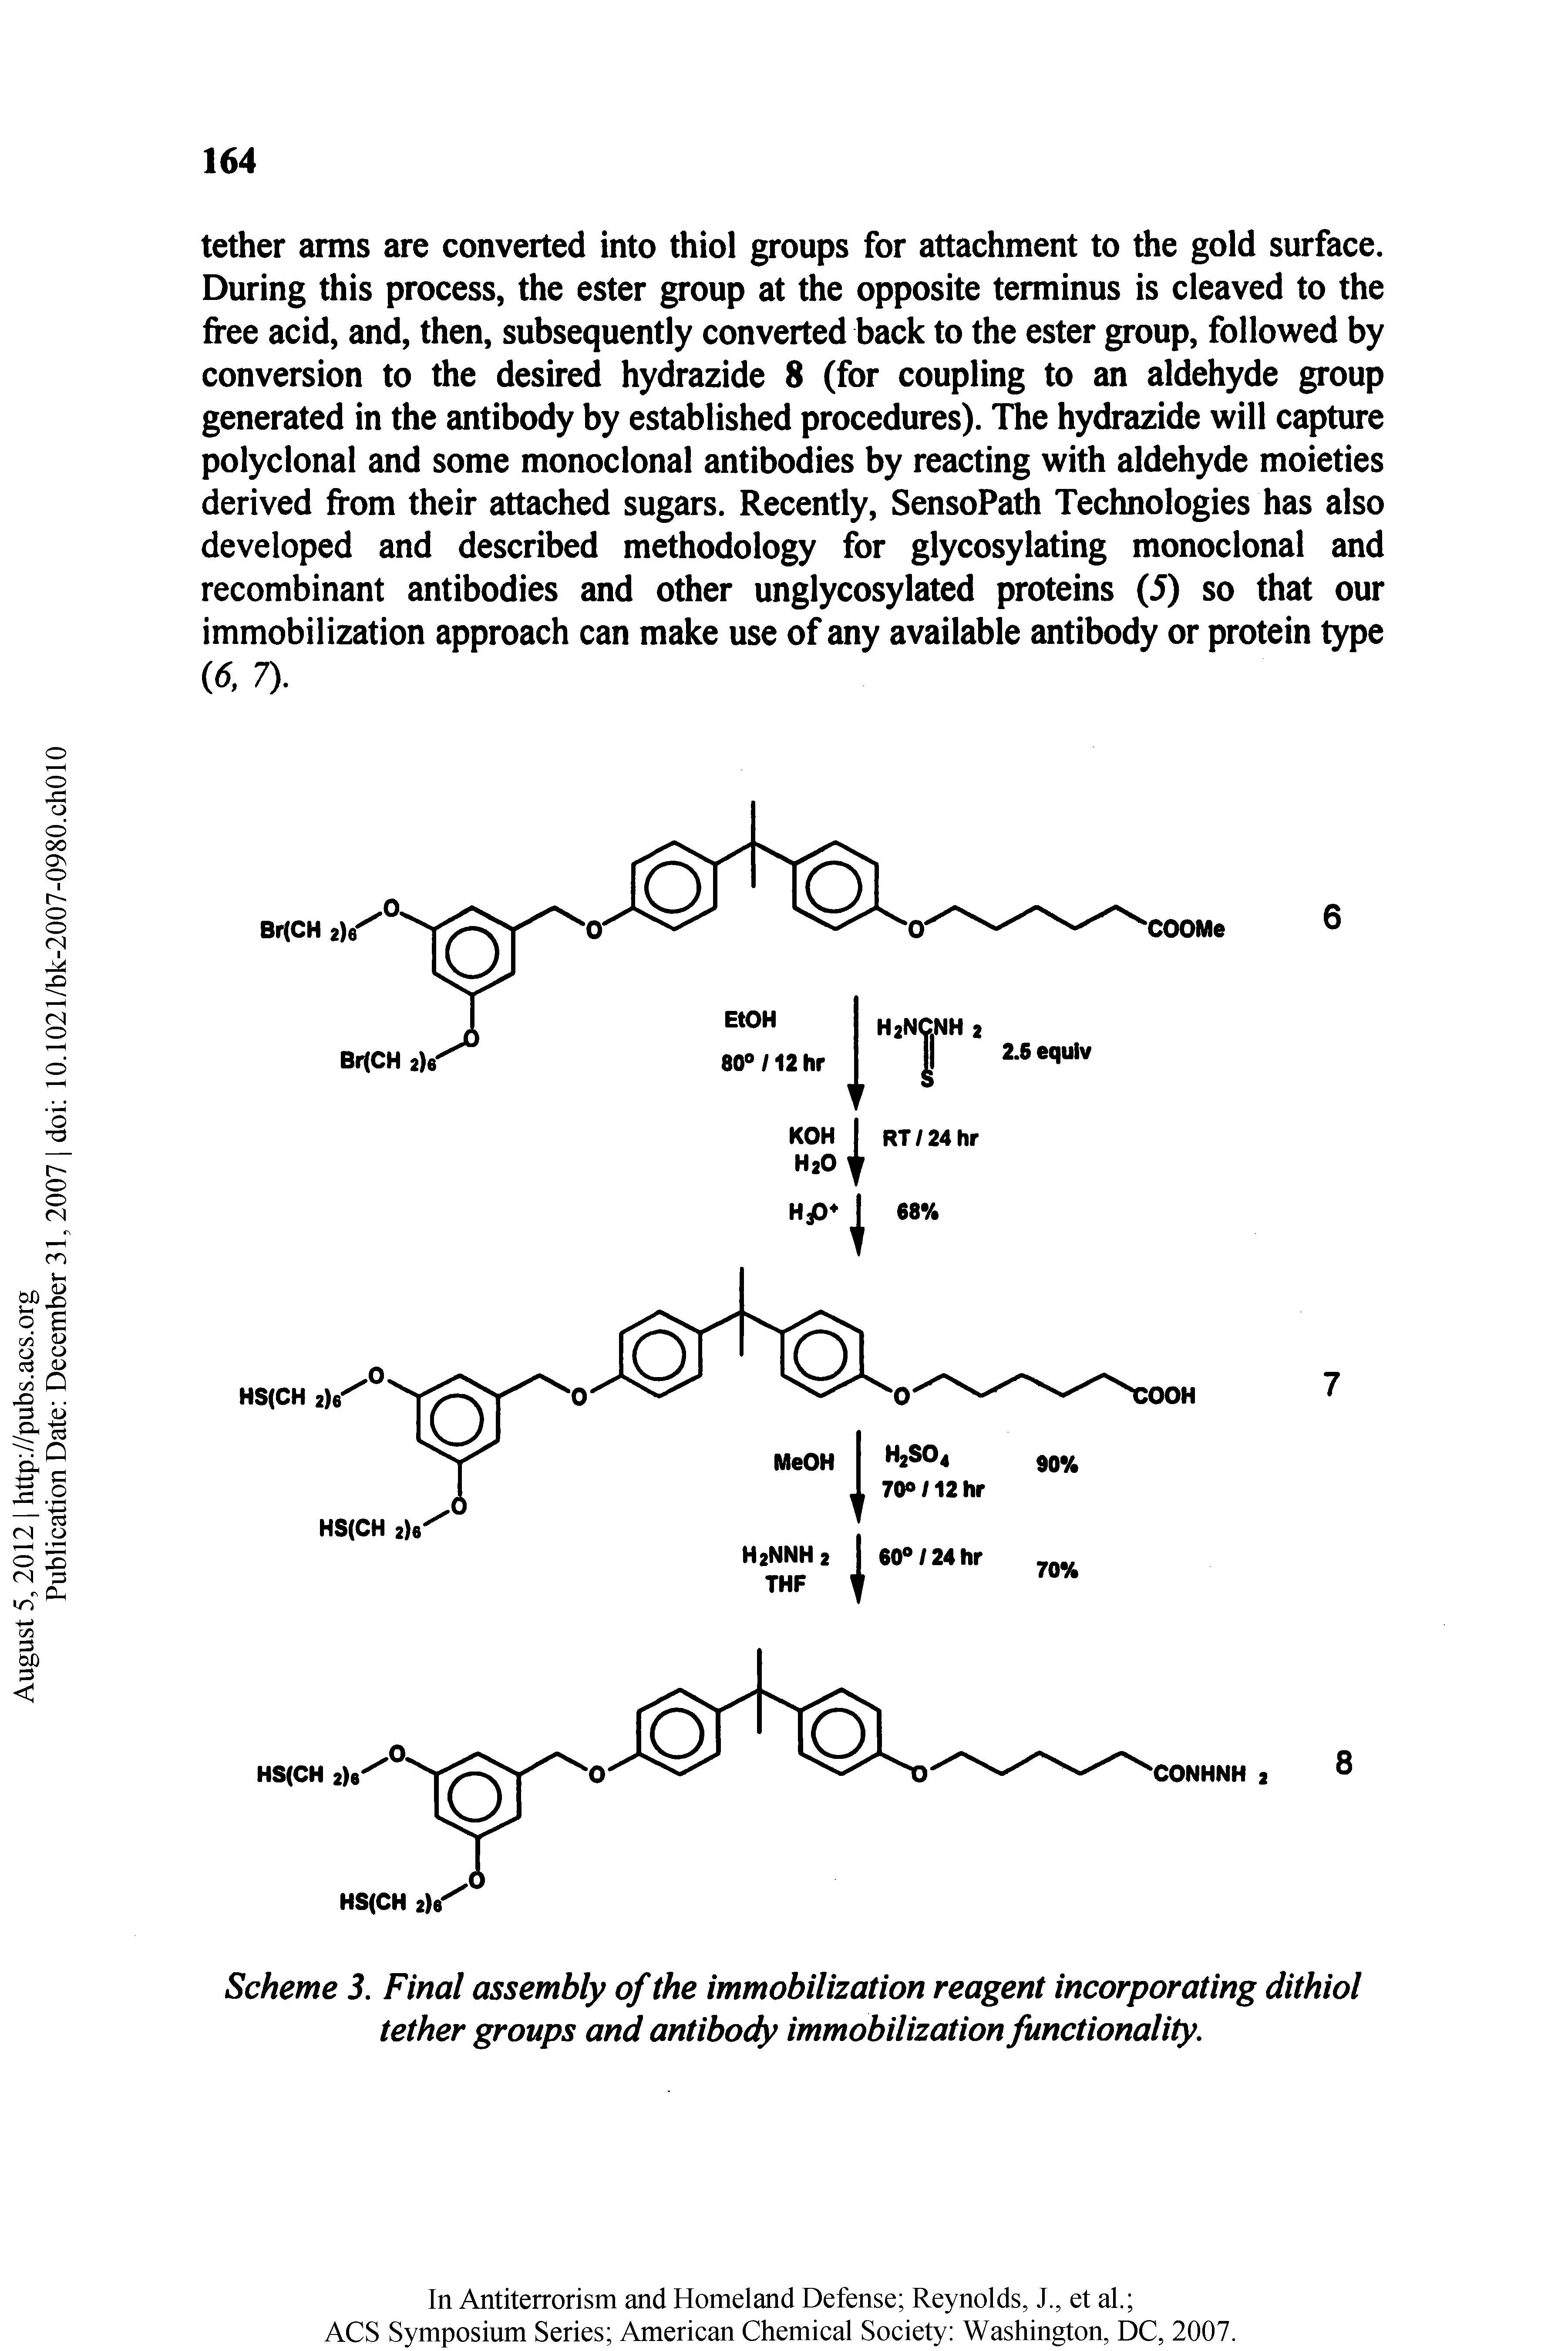 Scheme 3. Final assembly of the immobiltation reagent incorporating dithiol tether groups and antibody immobilization functionality.